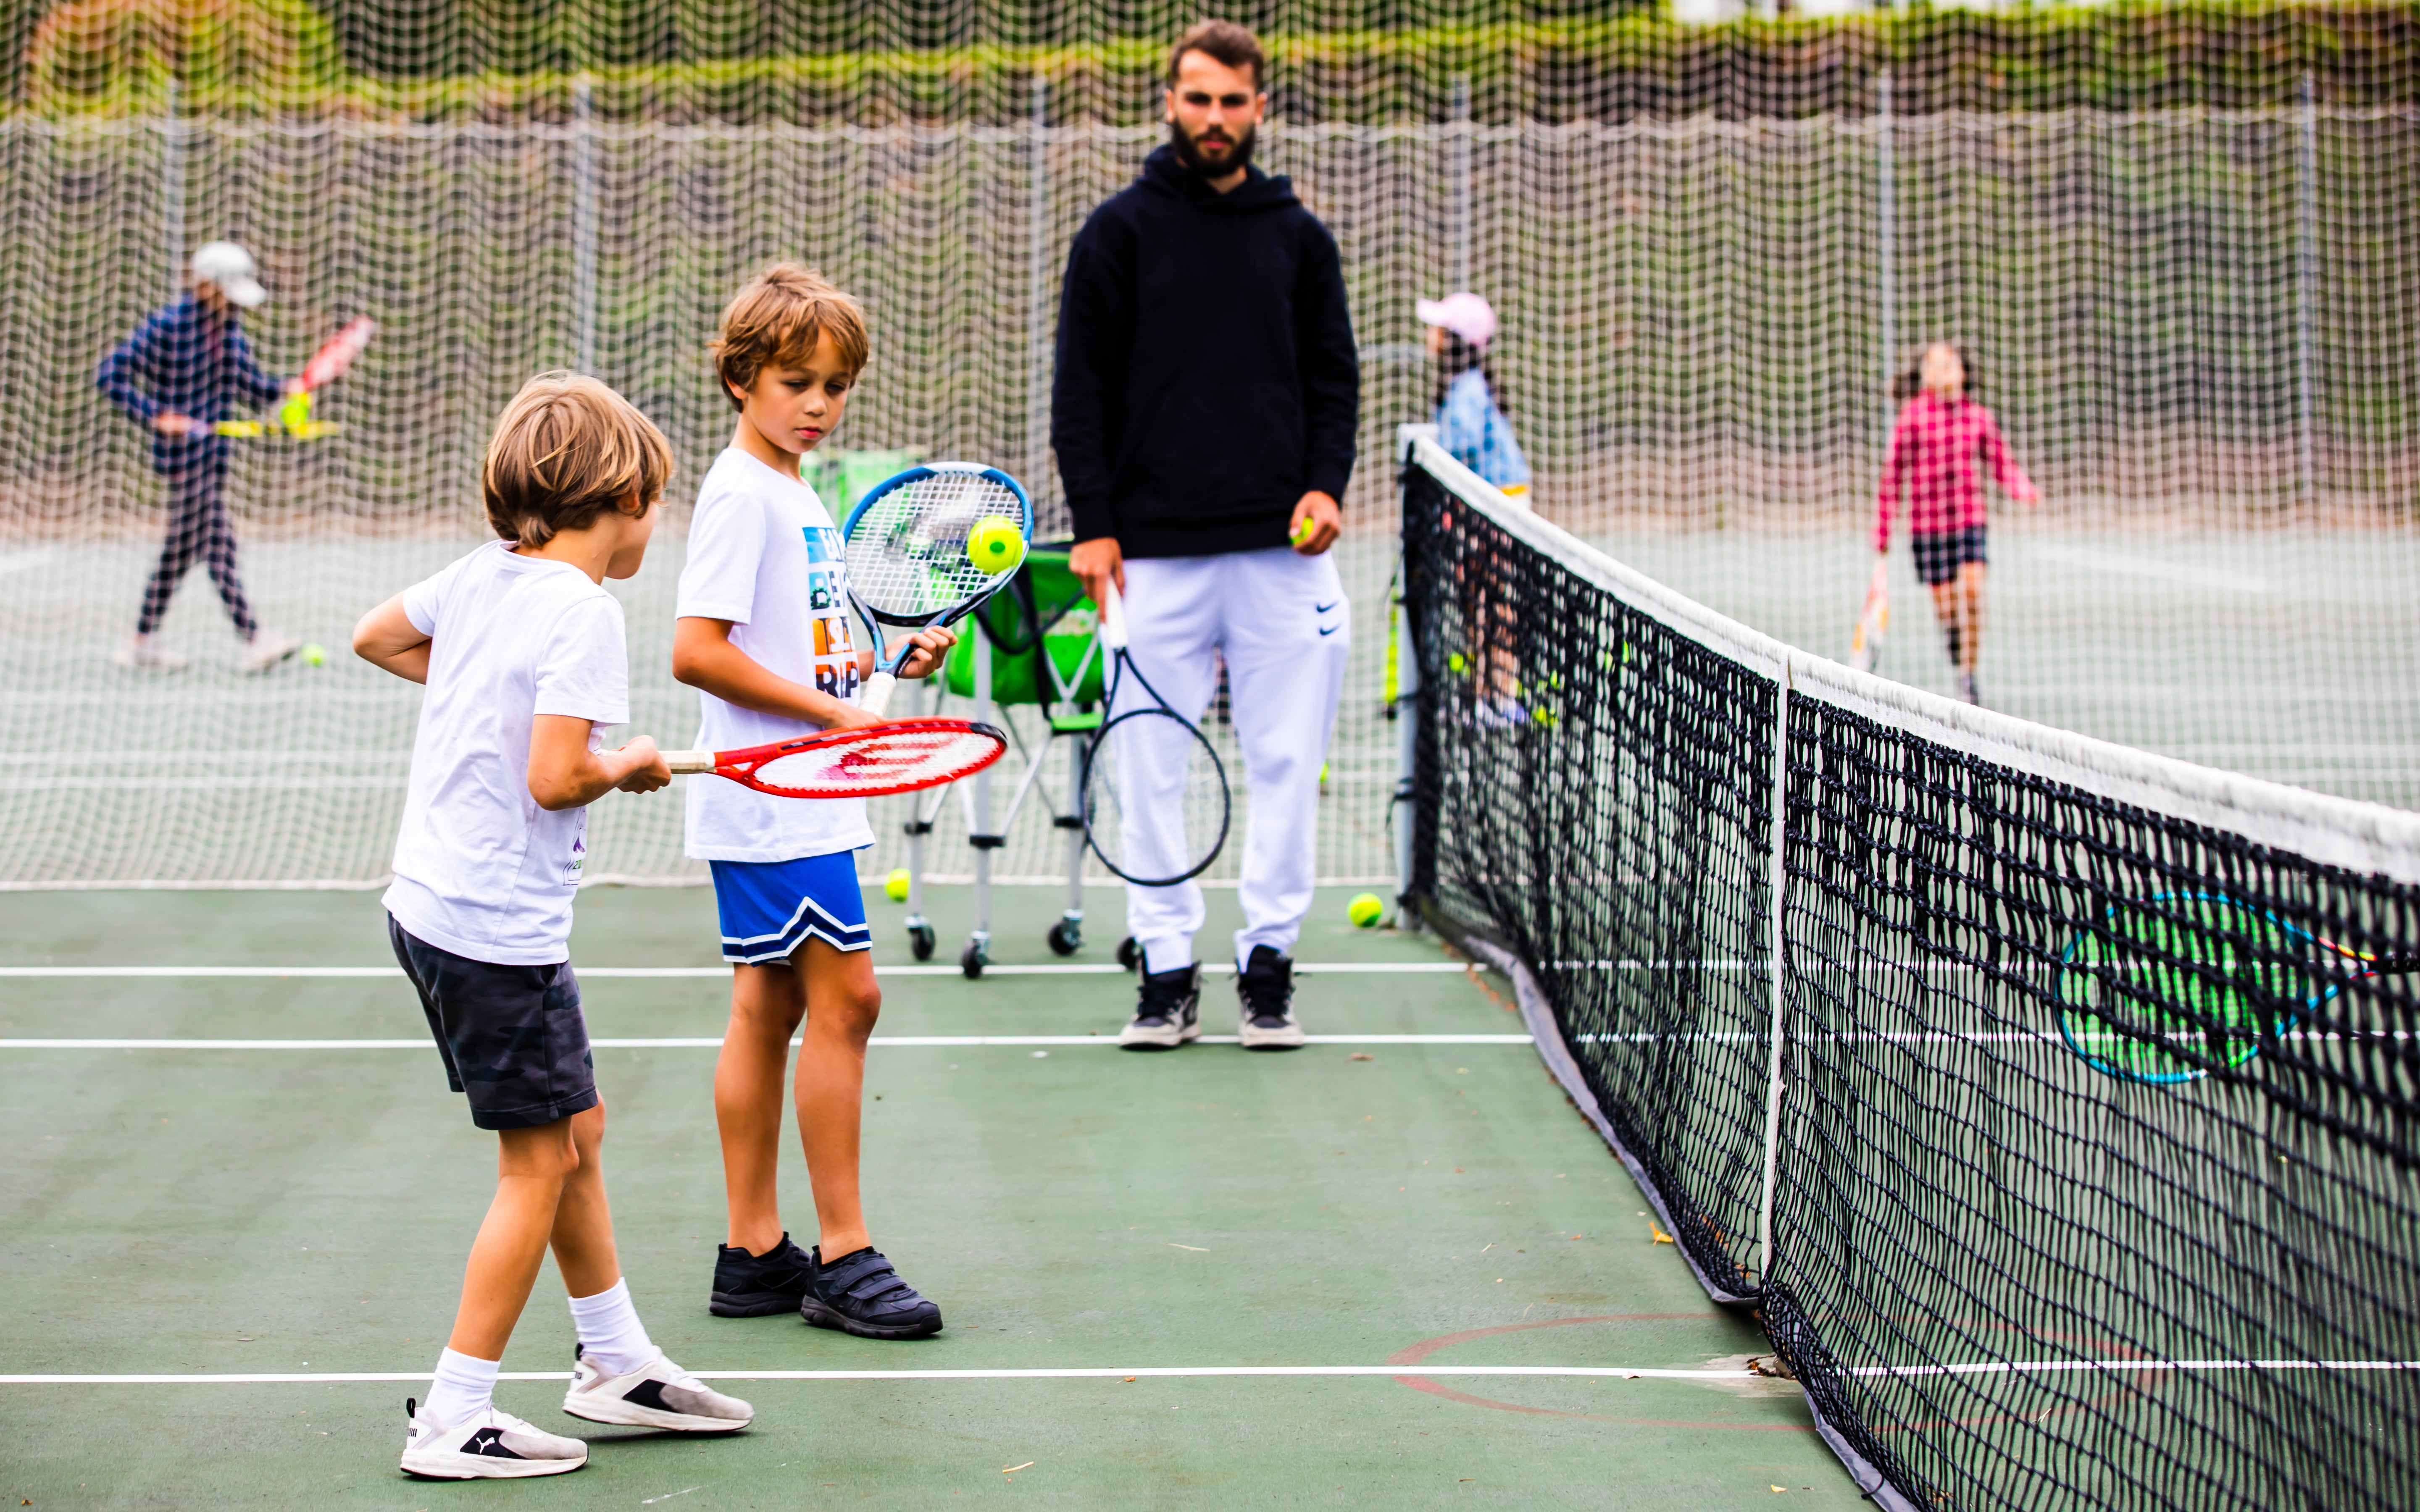 Junior Camp - Tennis and Multi-Activity, 6 to 12 years old